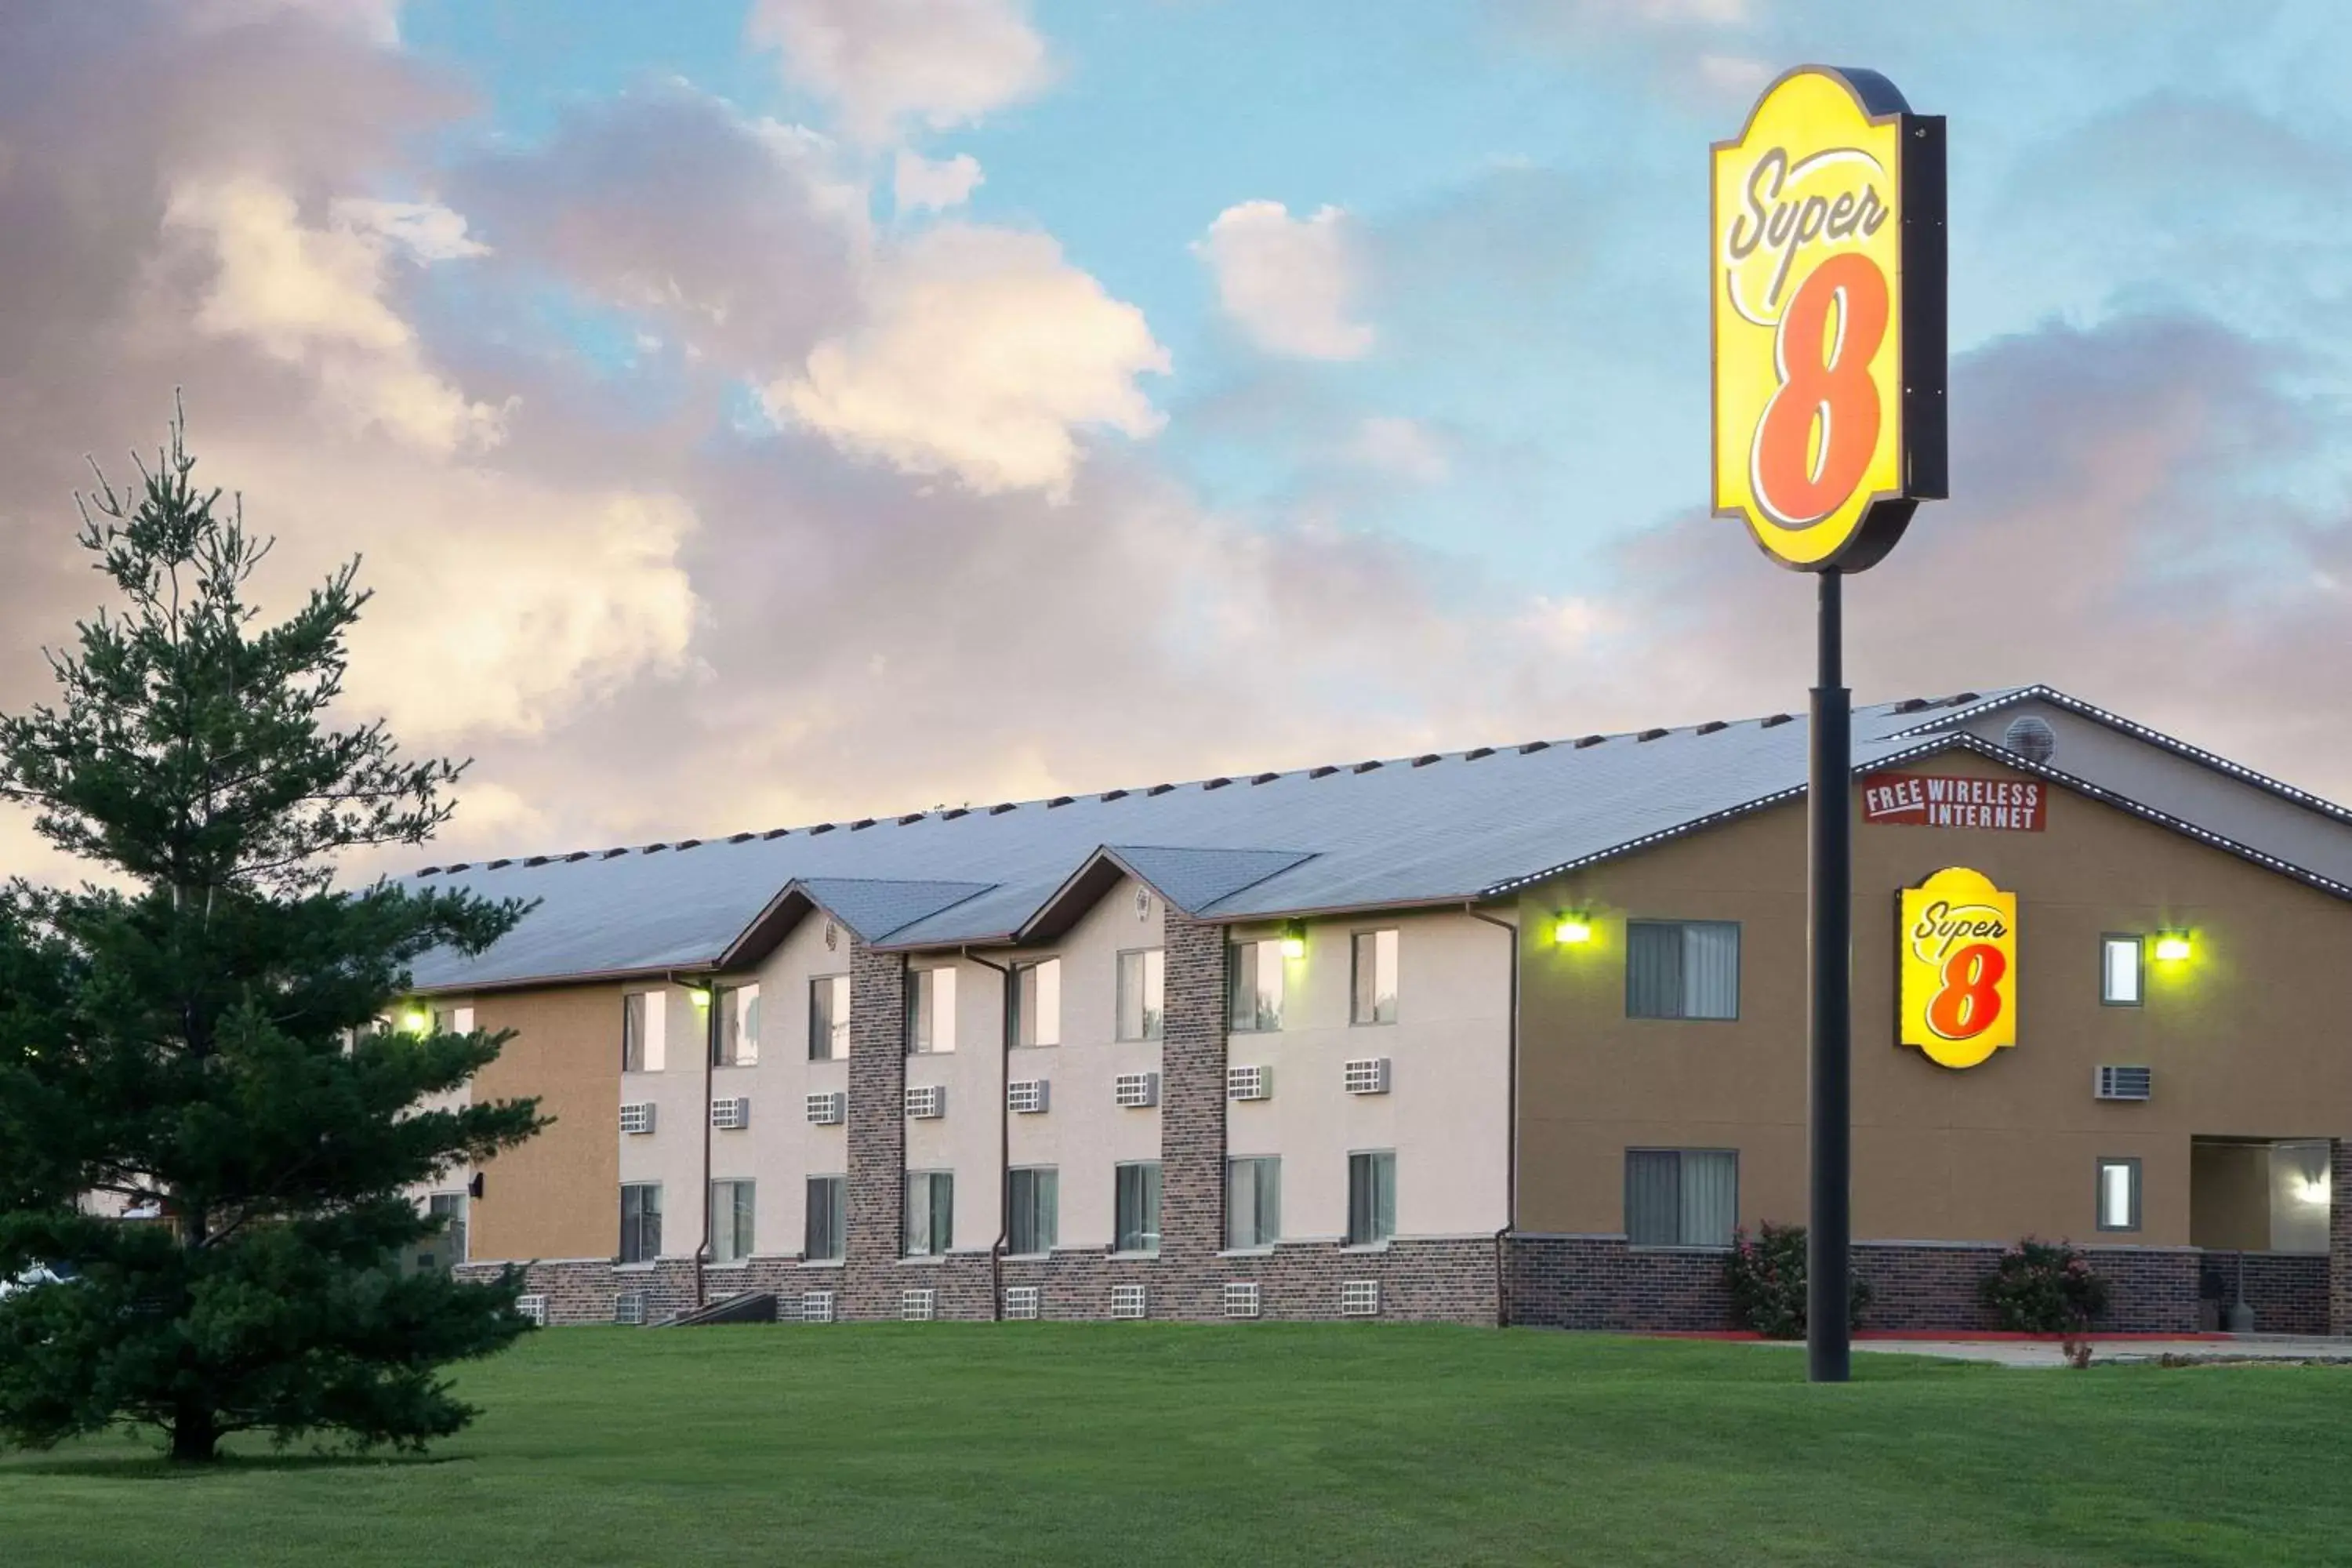 Property building in Super 8 by Wyndham Chillicothe